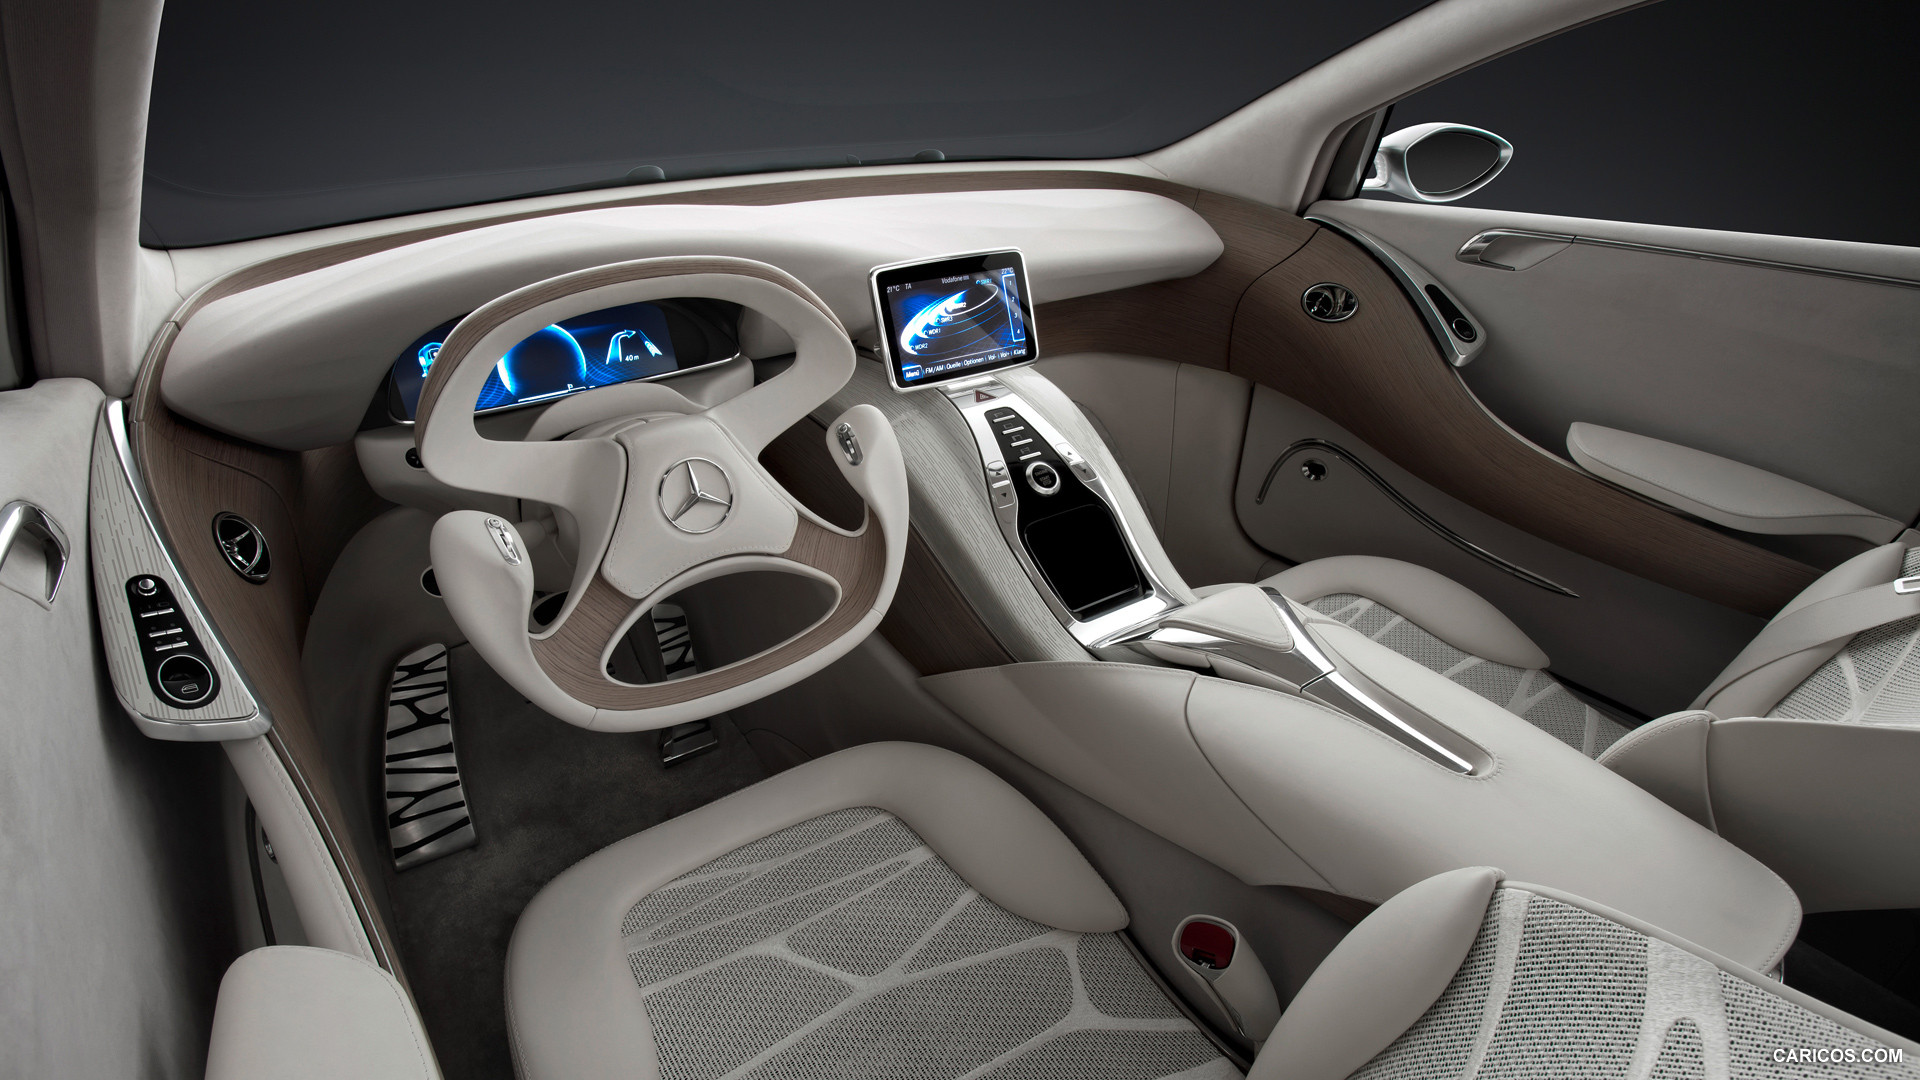 Mercedes-Benz F800 Style Concept (2010)  - Interior, #43 of 120